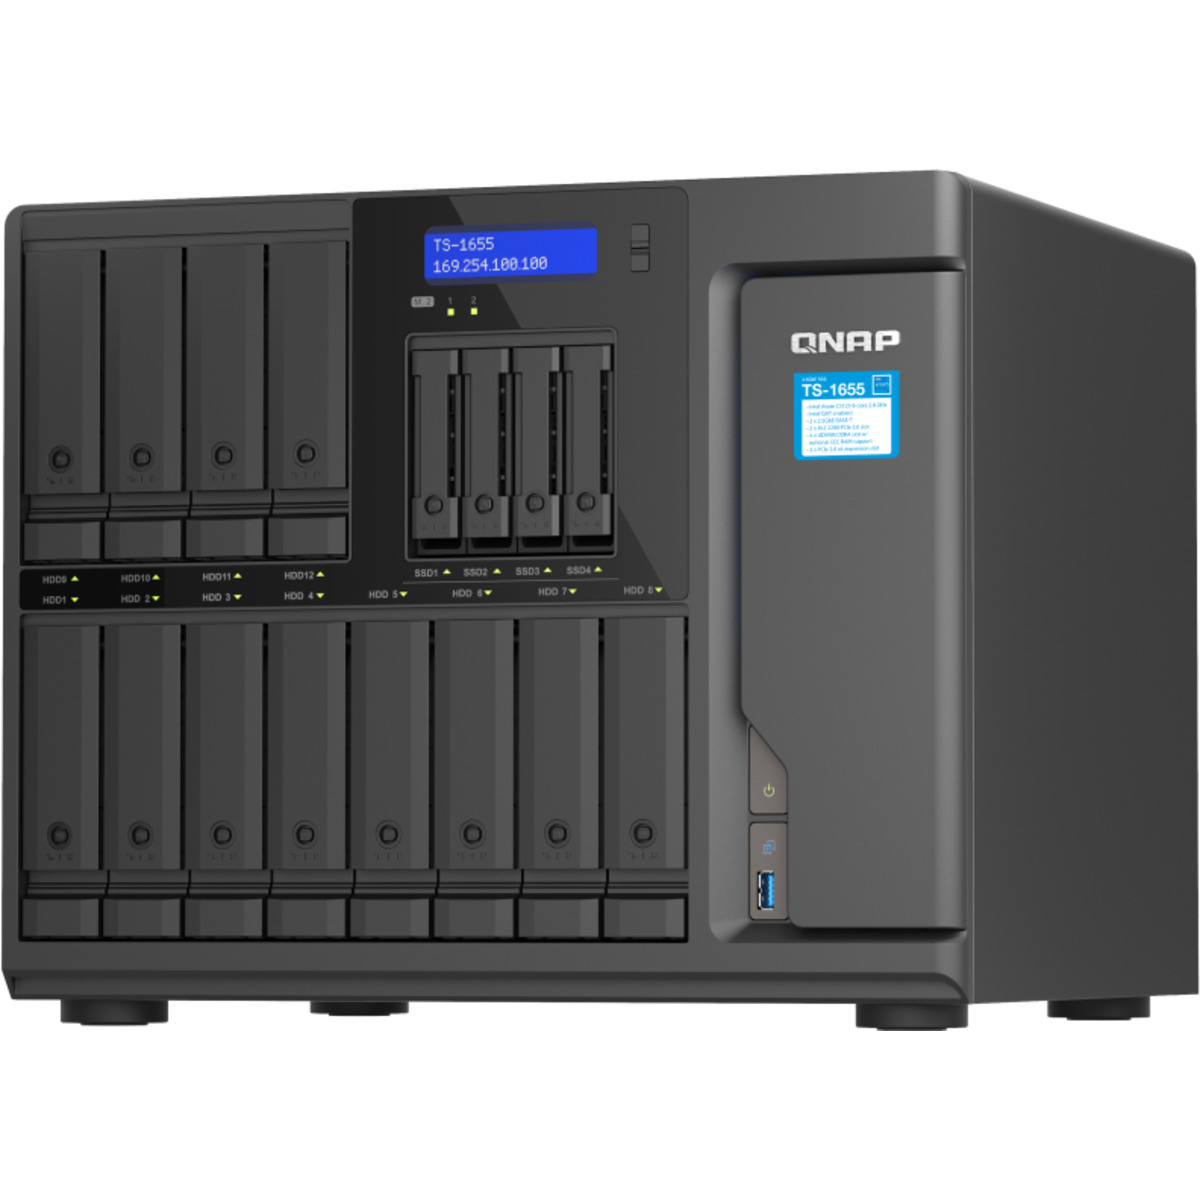 QNAP TS-1655 220tb 12+4-Bay Desktop Multimedia / Power User / Business NAS - Network Attached Storage Device 10x22tb Western Digital Red Pro WD221KFGX 3.5 7200rpm SATA 6Gb/s HDD NAS Class Drives Installed - Burn-In Tested - FREE RAM UPGRADE TS-1655